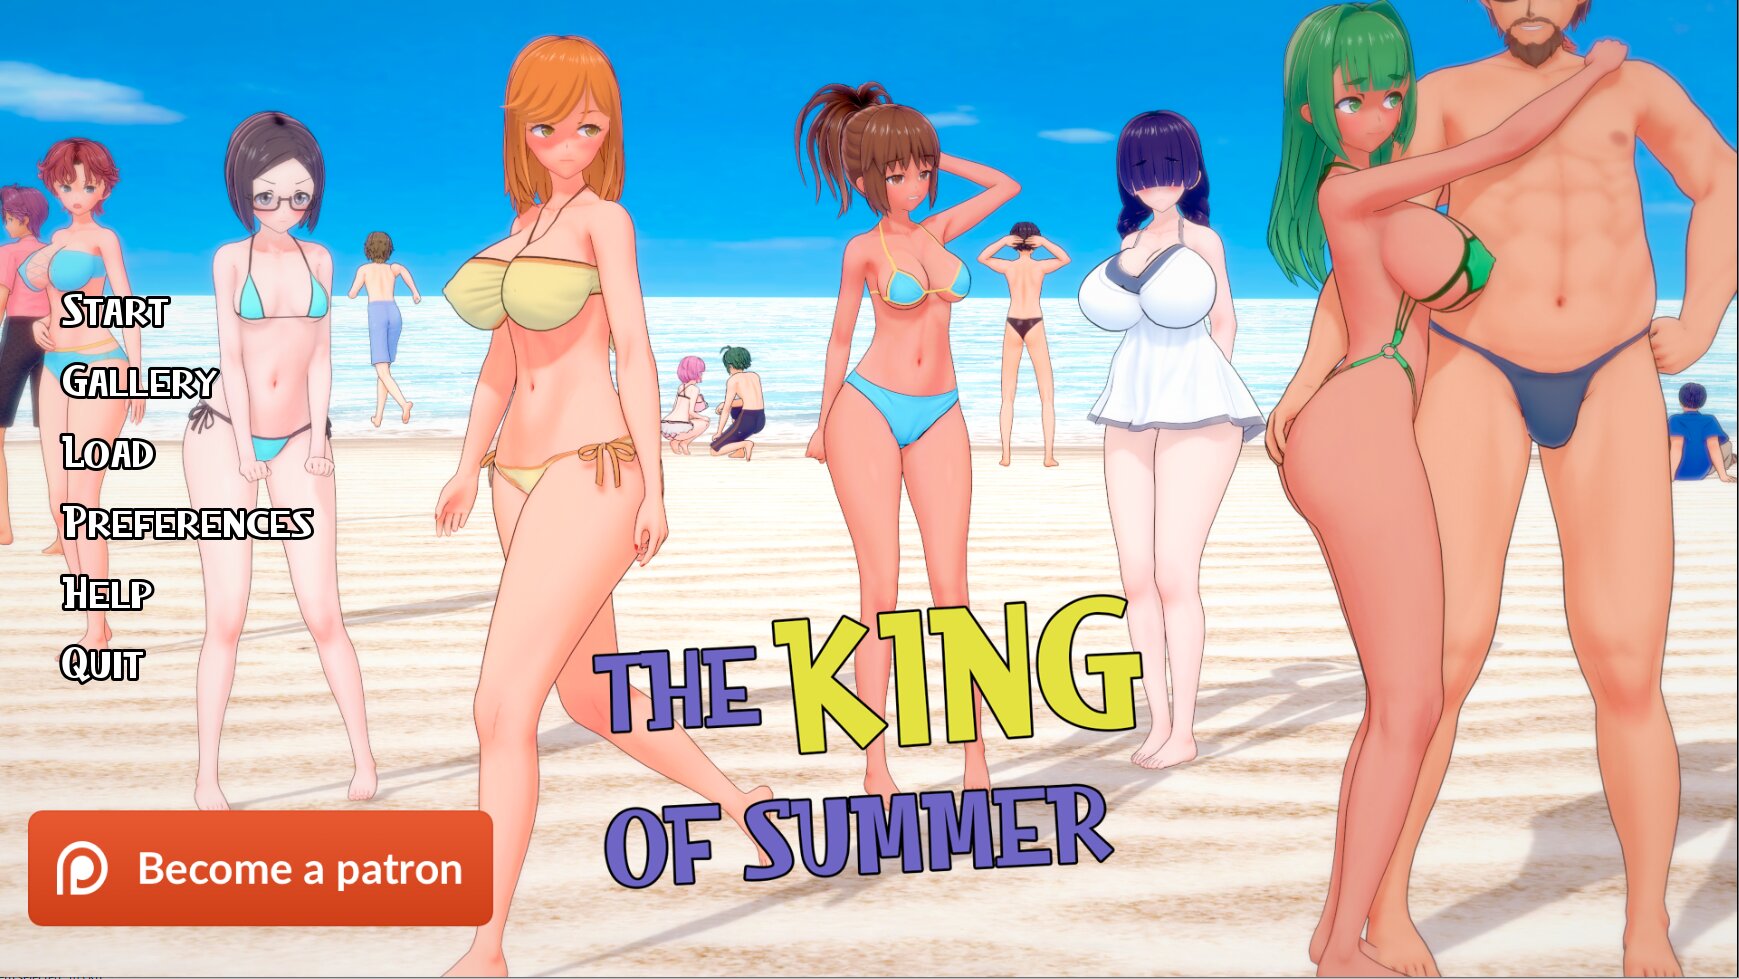 Adultgamesworld Free Porn Games and Sex Games » The King of Summer